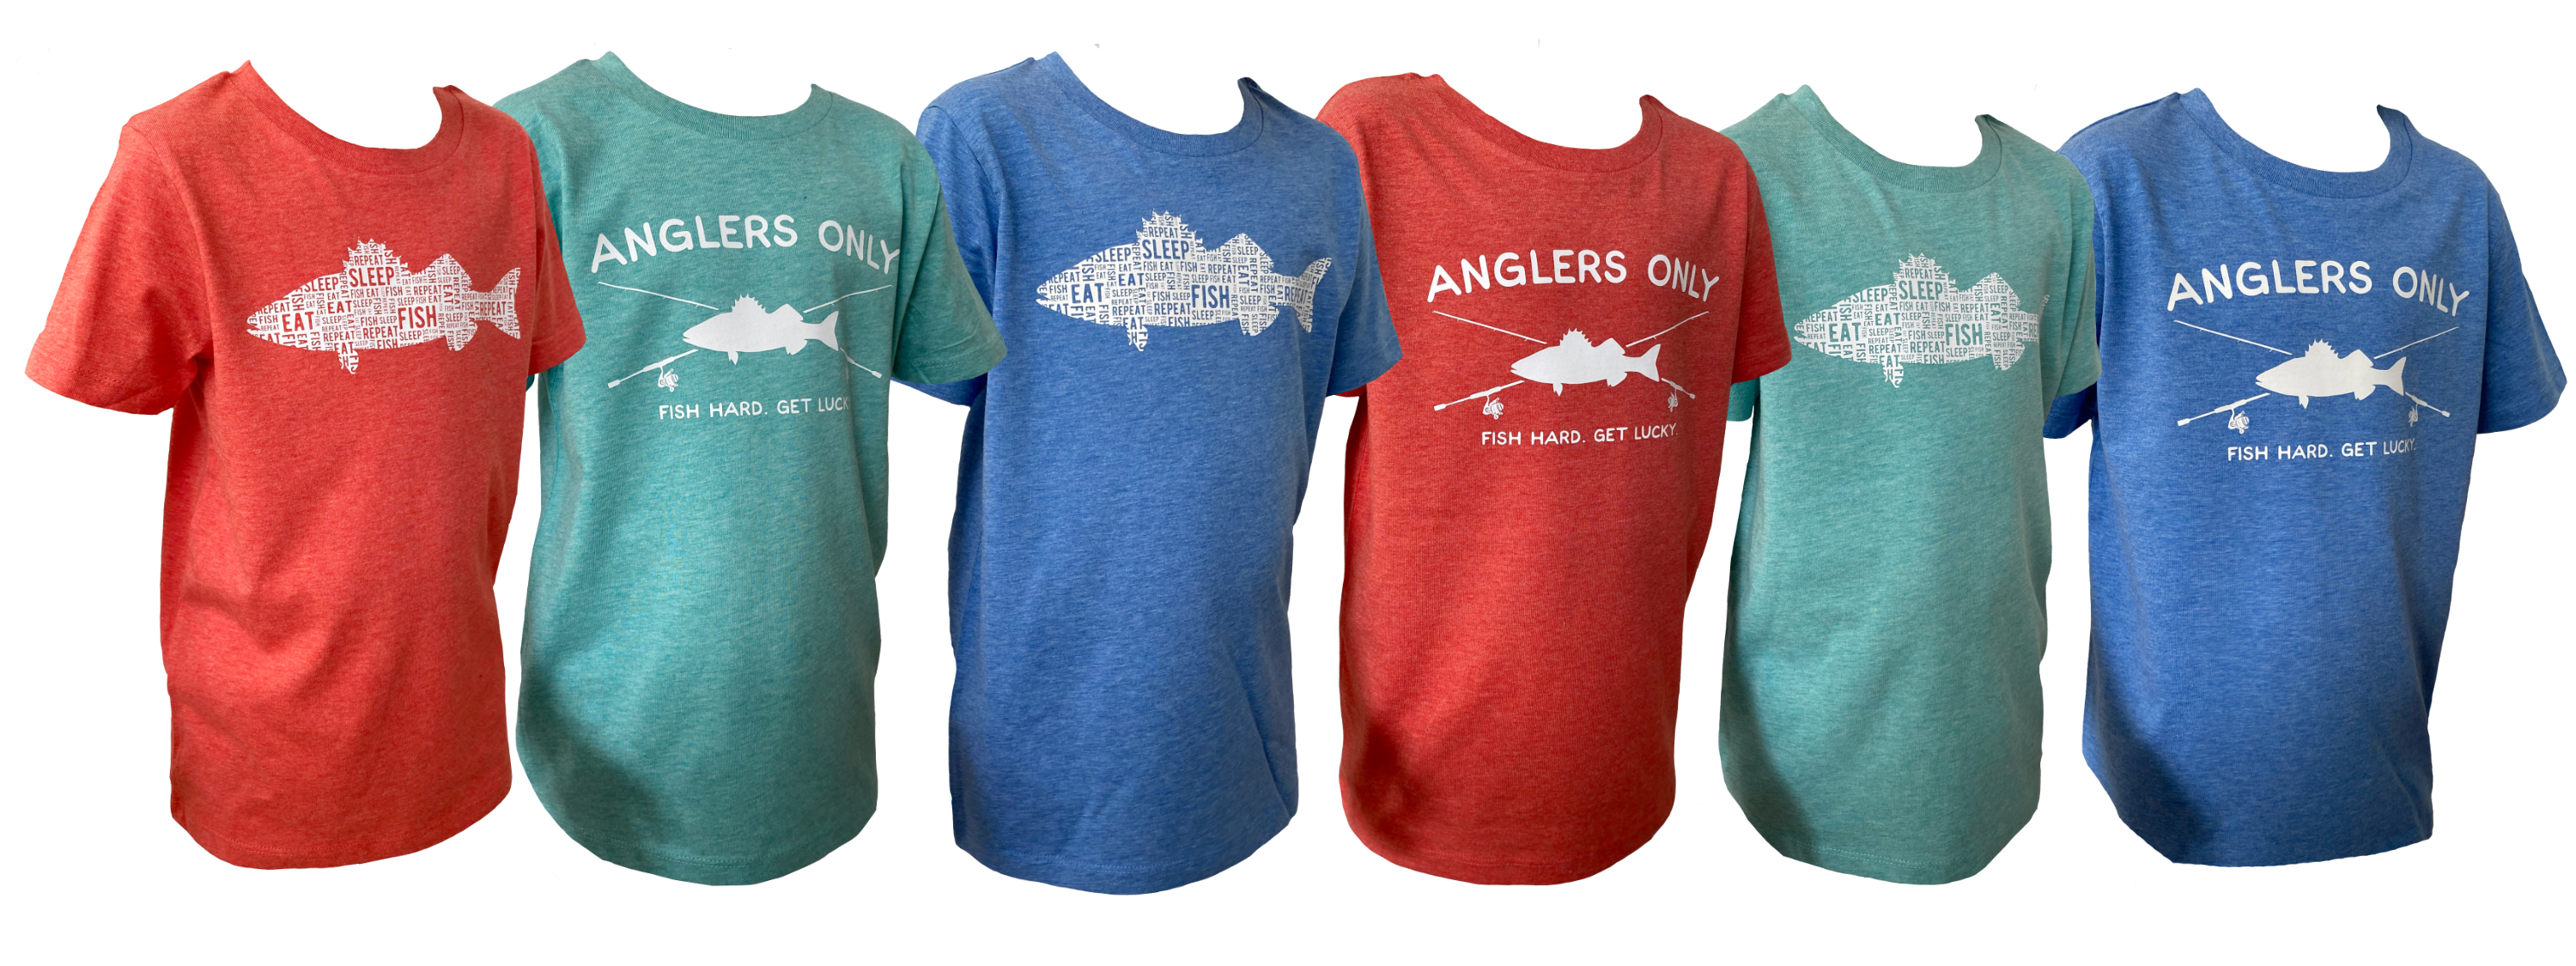 Anglers Only Kids: Fishing Clothing for Children